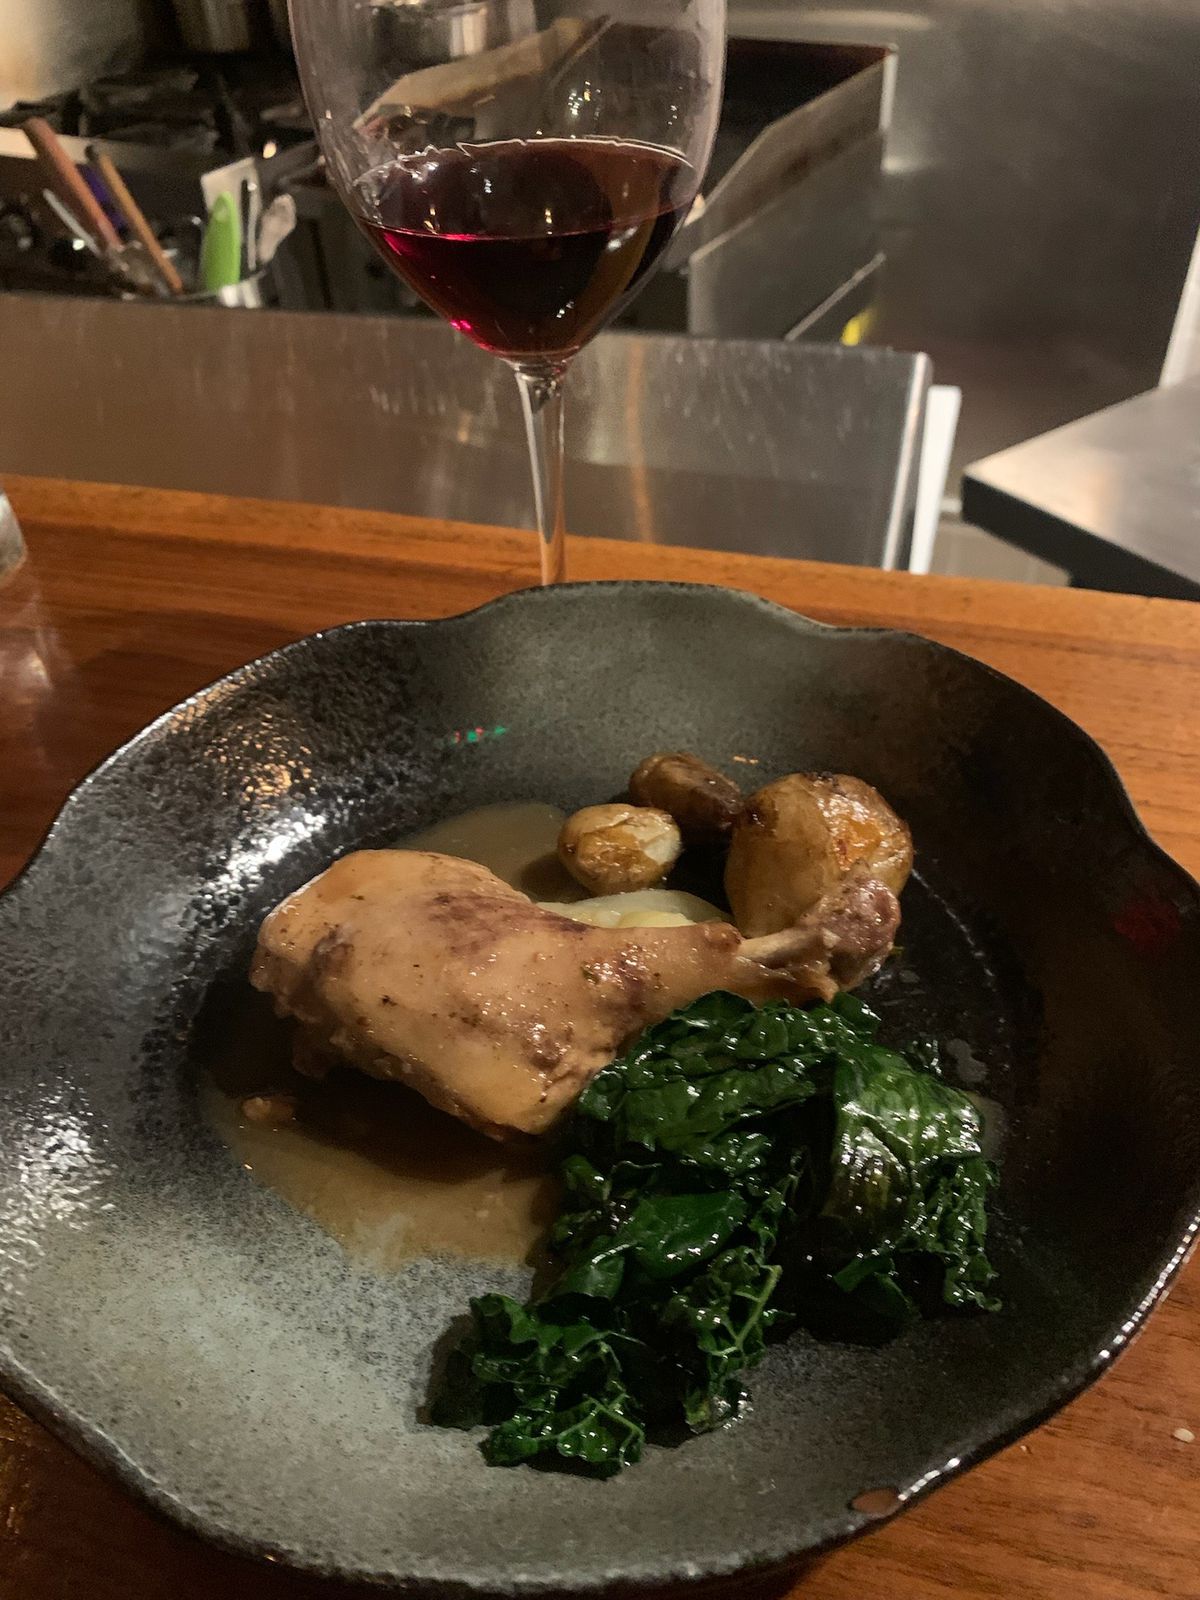 Braised duck leg with sauteed kale at Mr. Pollo.